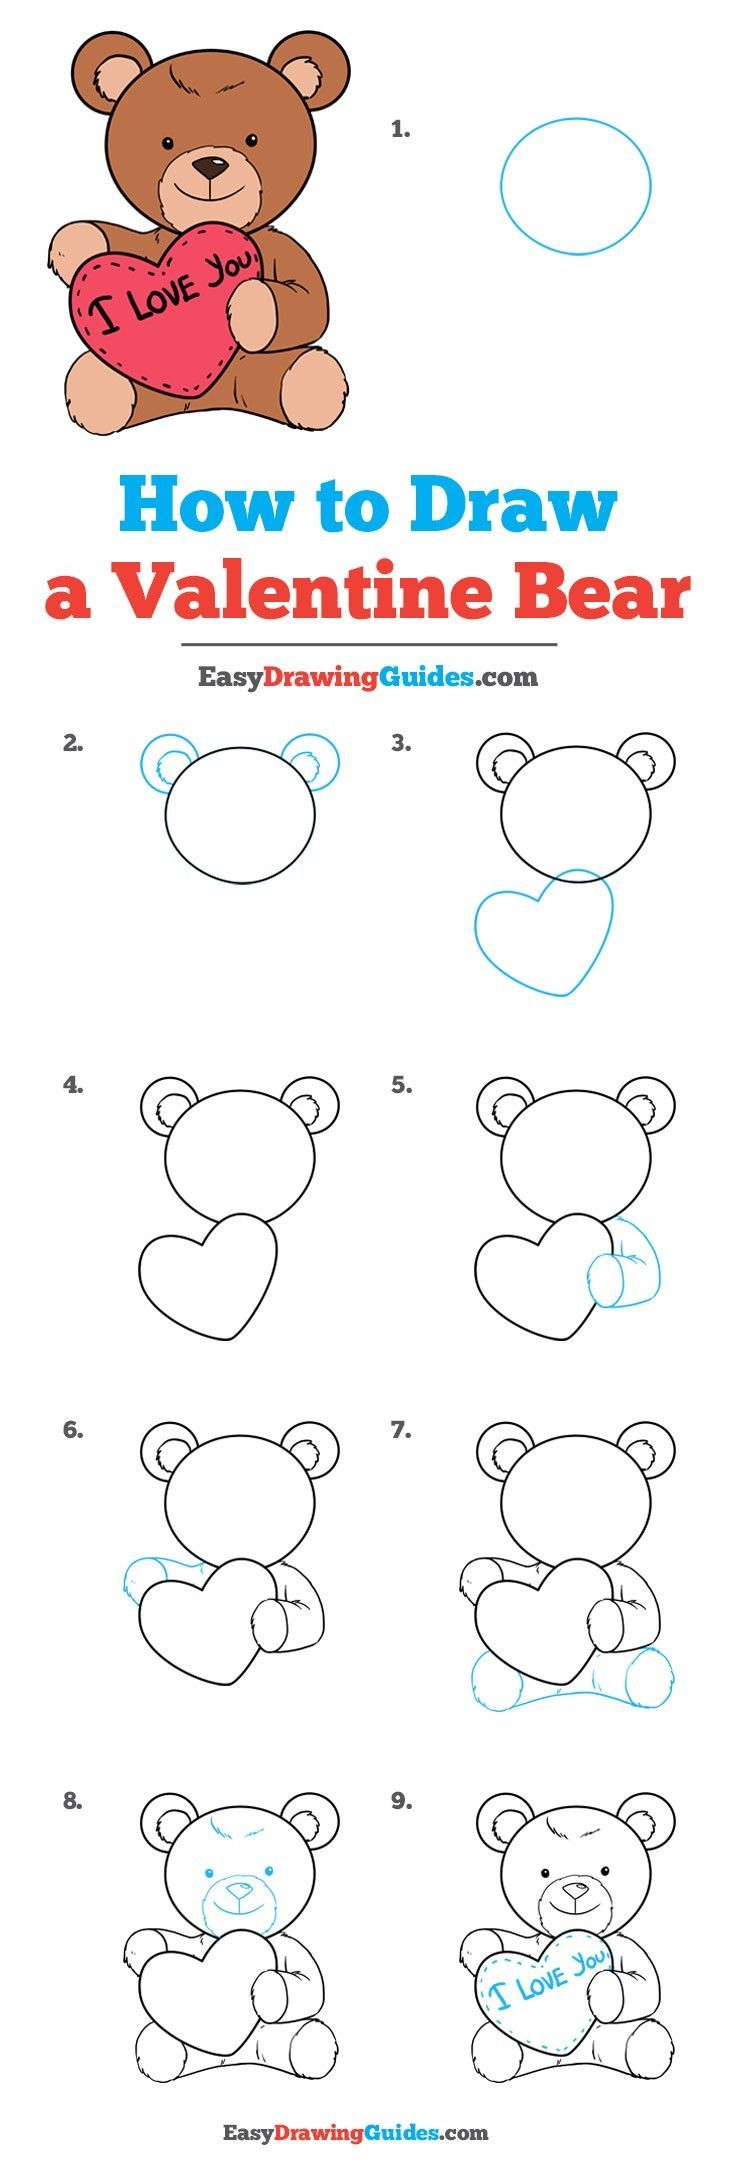 How To Draw A Teddy Bear With A Heart - Really Easy Drawing Tutorial